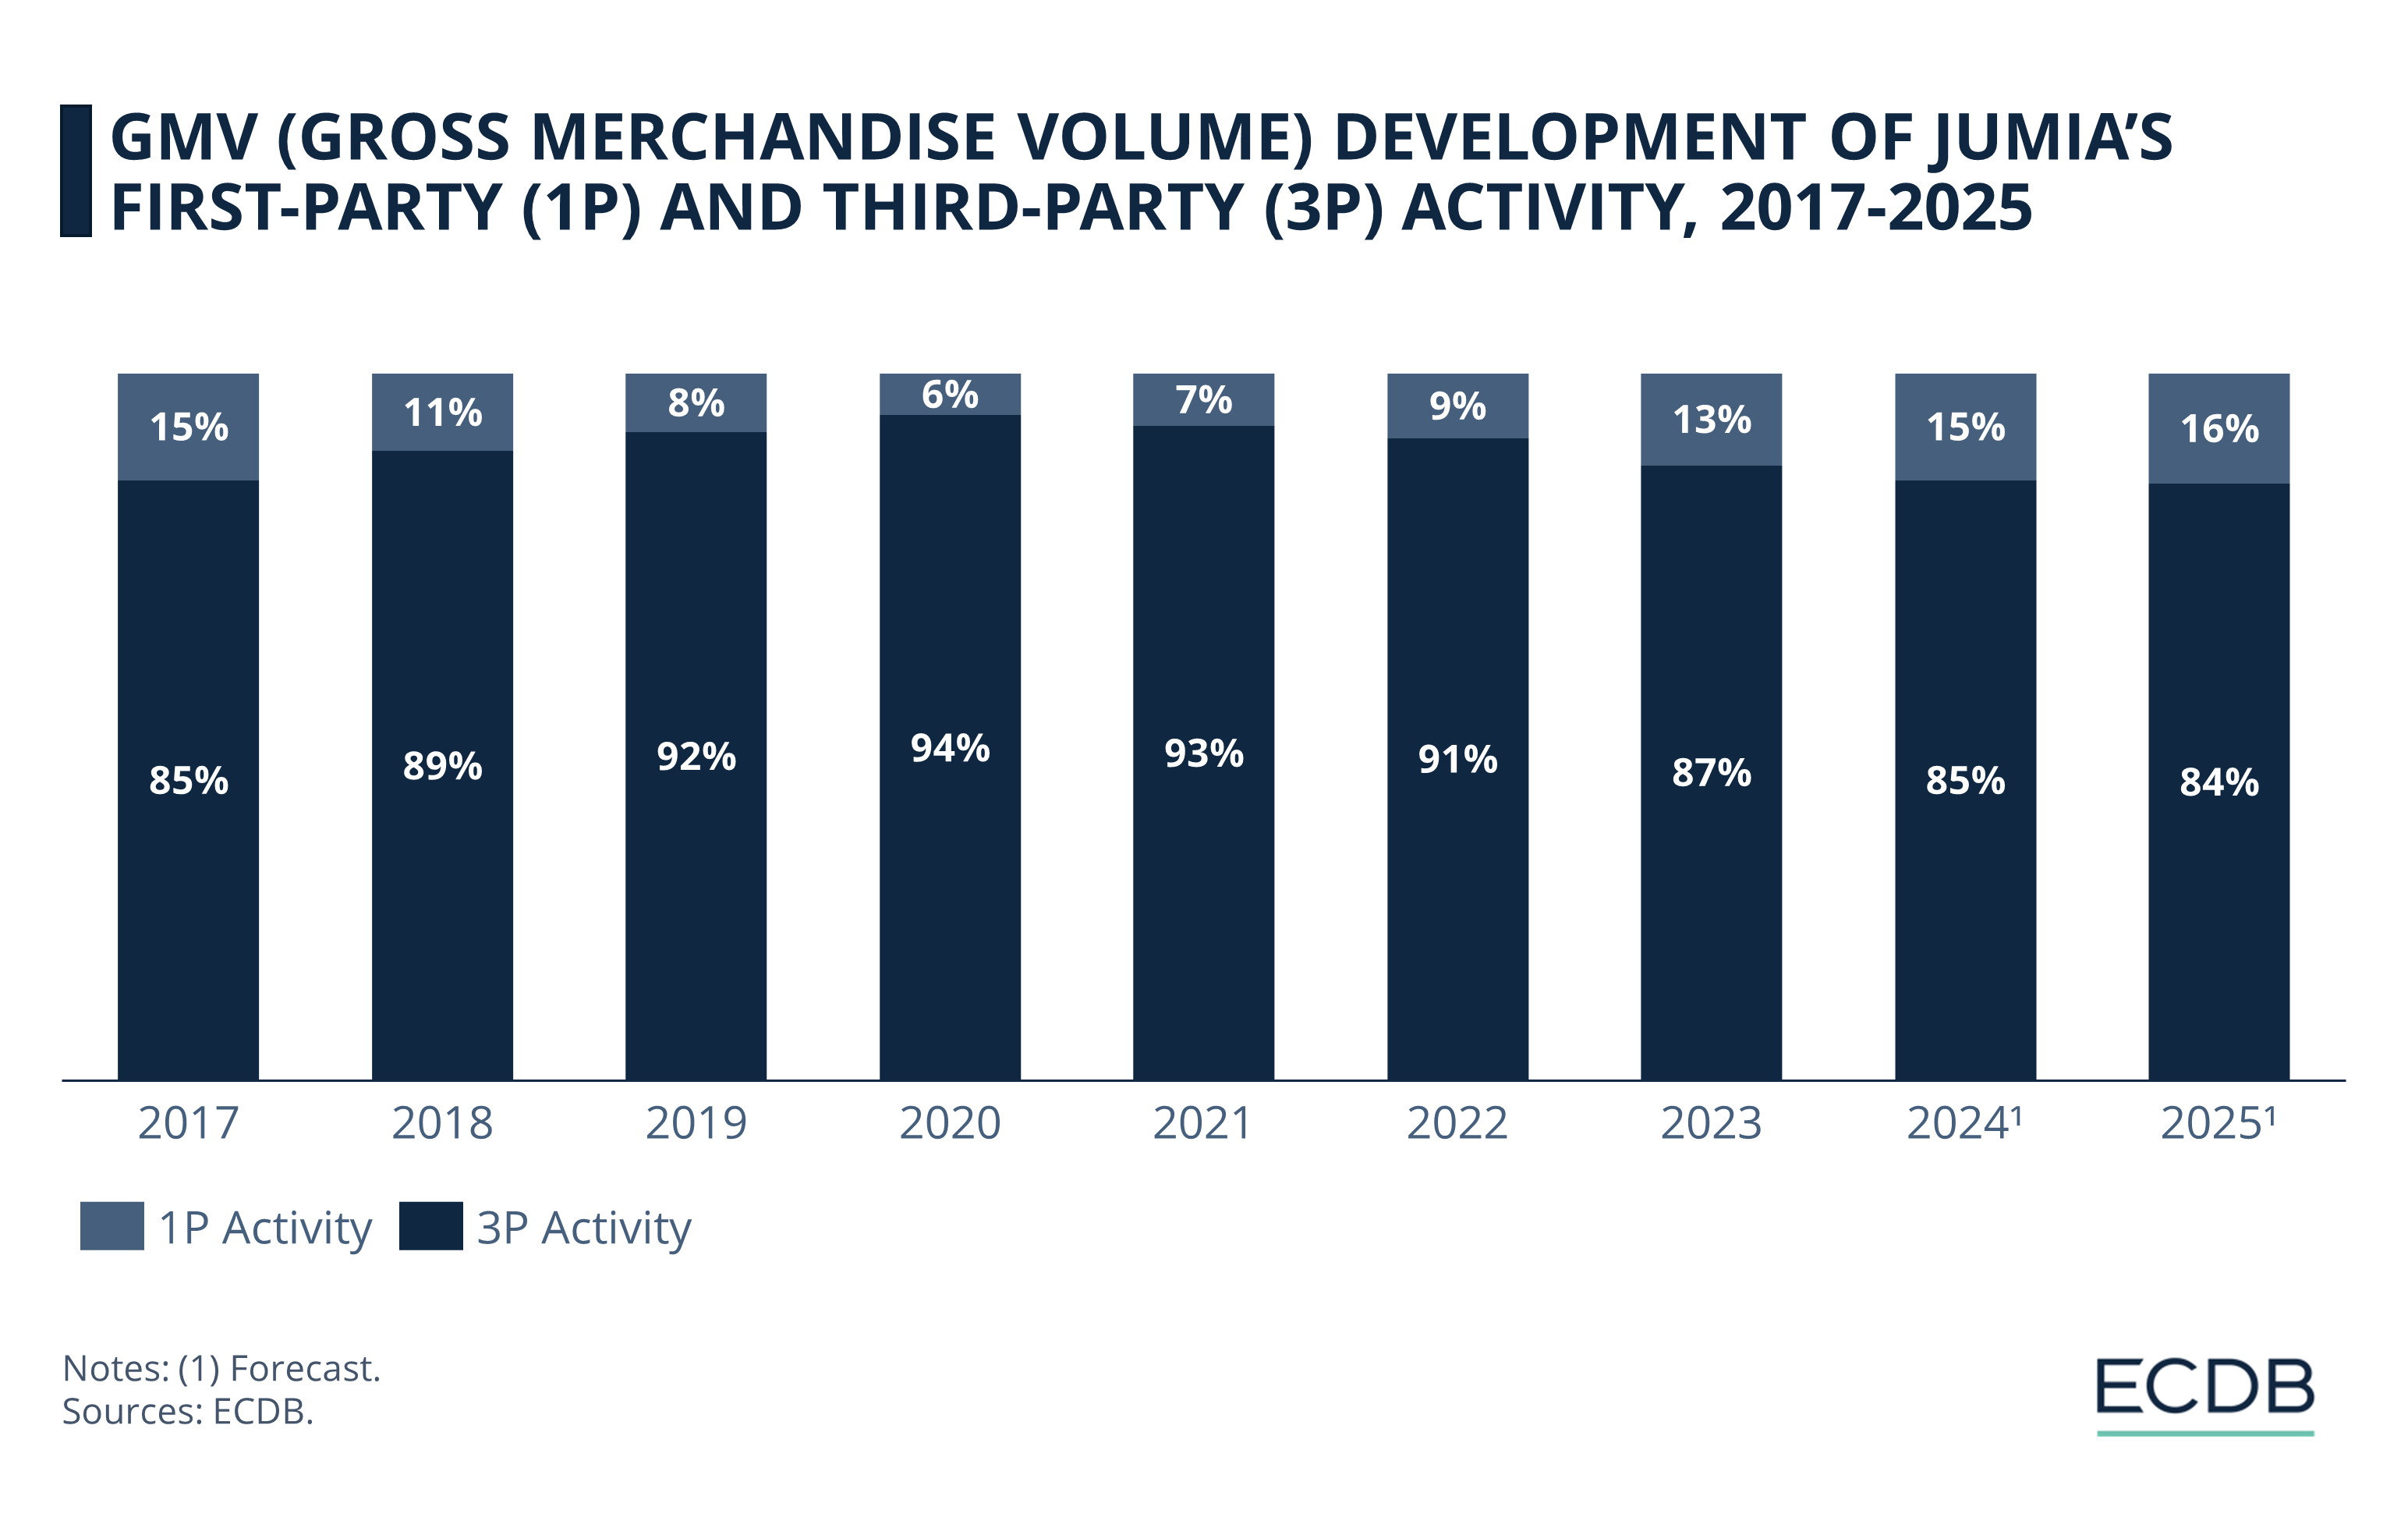 GMV (Gross Merchandise Volume) Development of Jumia’s First-Party (1P) and Third-Party (3P) Activity, 2017-2025